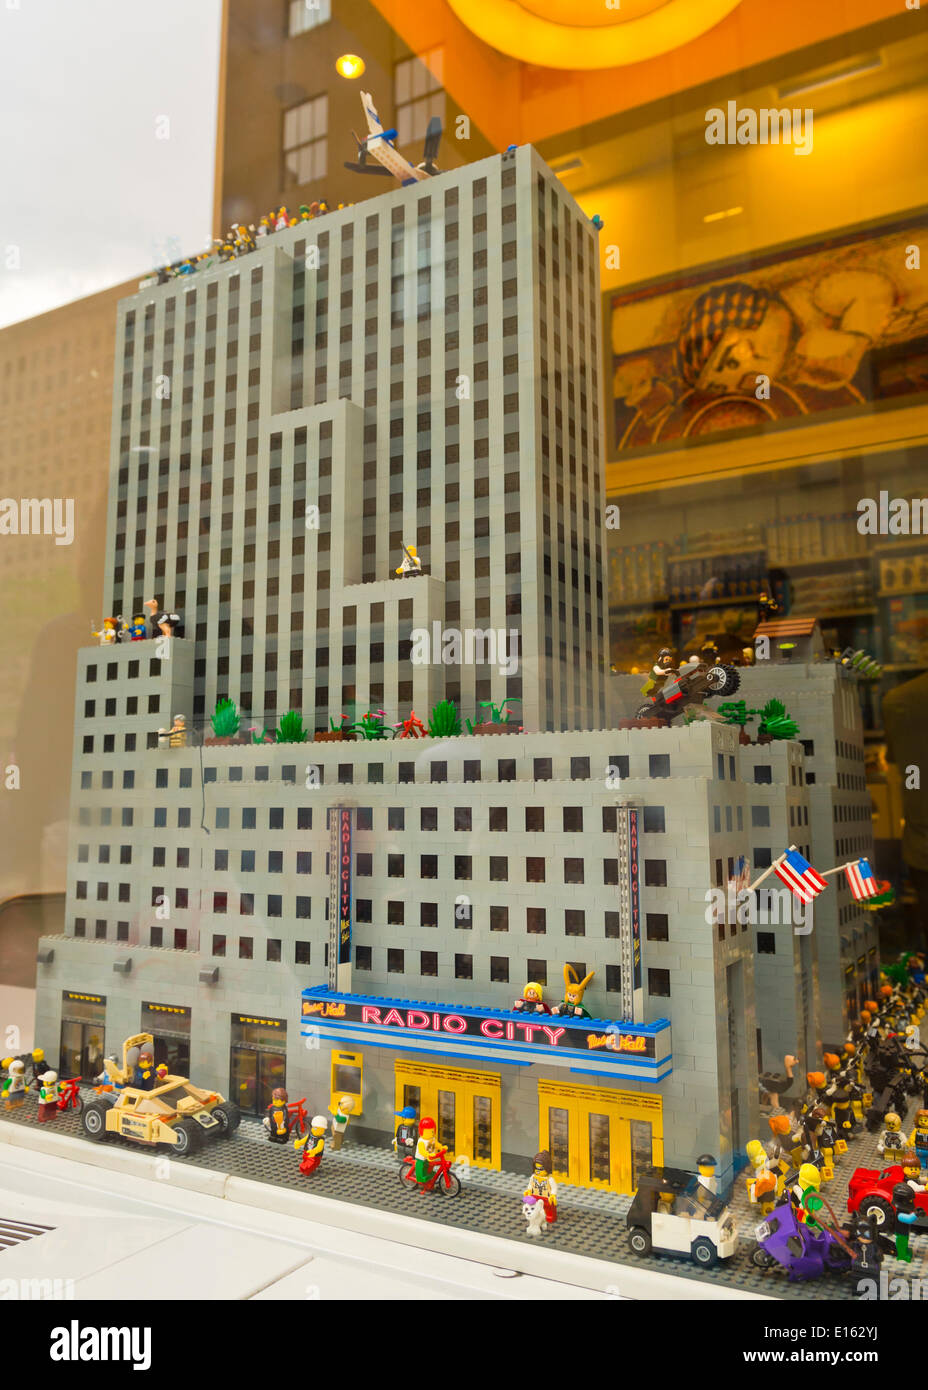 Manhattan, New York, U.S. - May 21, 2014 - In Rockefeller Center, the Lego has Lego with a recreation of Radio City Music Hall in its window display, Manhattan.